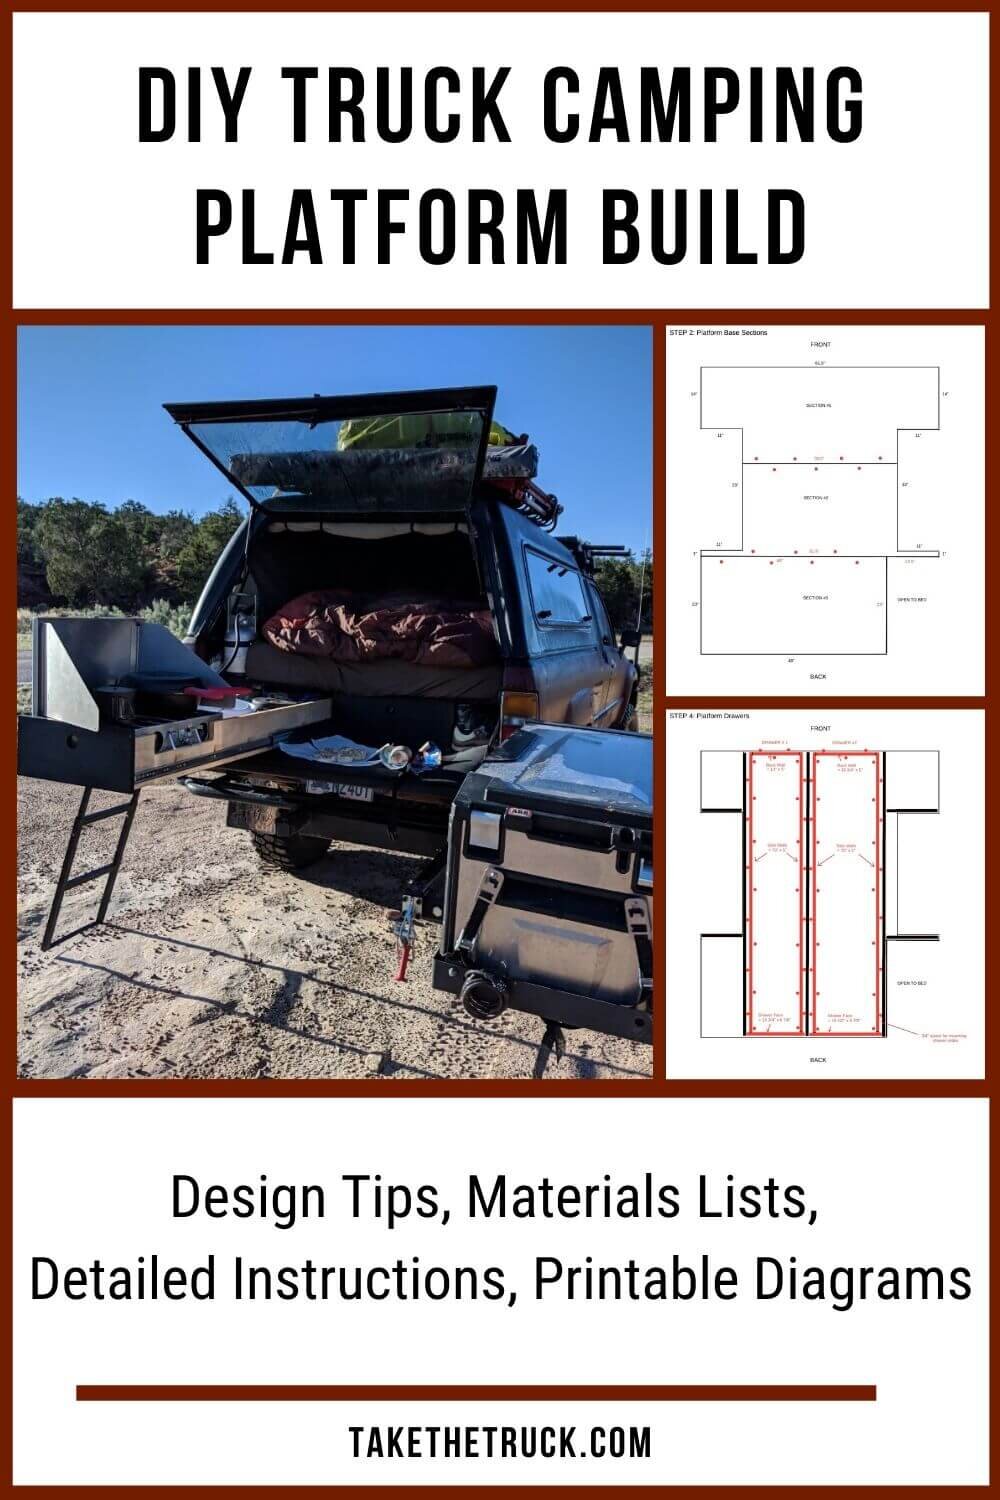 Detailed truck camper plans and diagrams to build an awesome DIY truck bed camping platform for sleeping with truck bed drawers for a storage system. Truck camping platform build made easy!